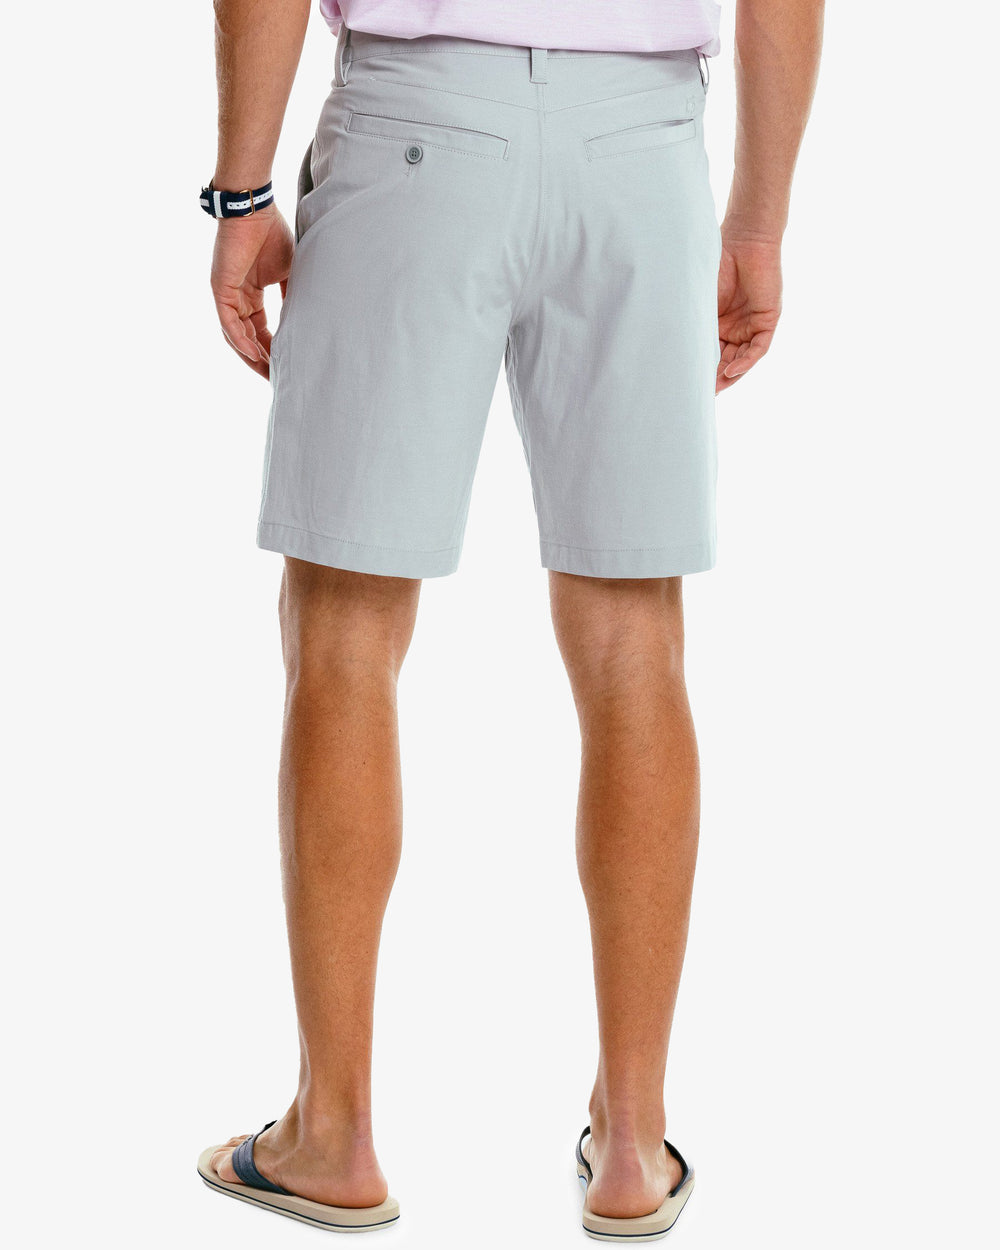 The back of the Men's T3 Gulf 9 Inch Performance Short by Southern Tide - Seagull Grey